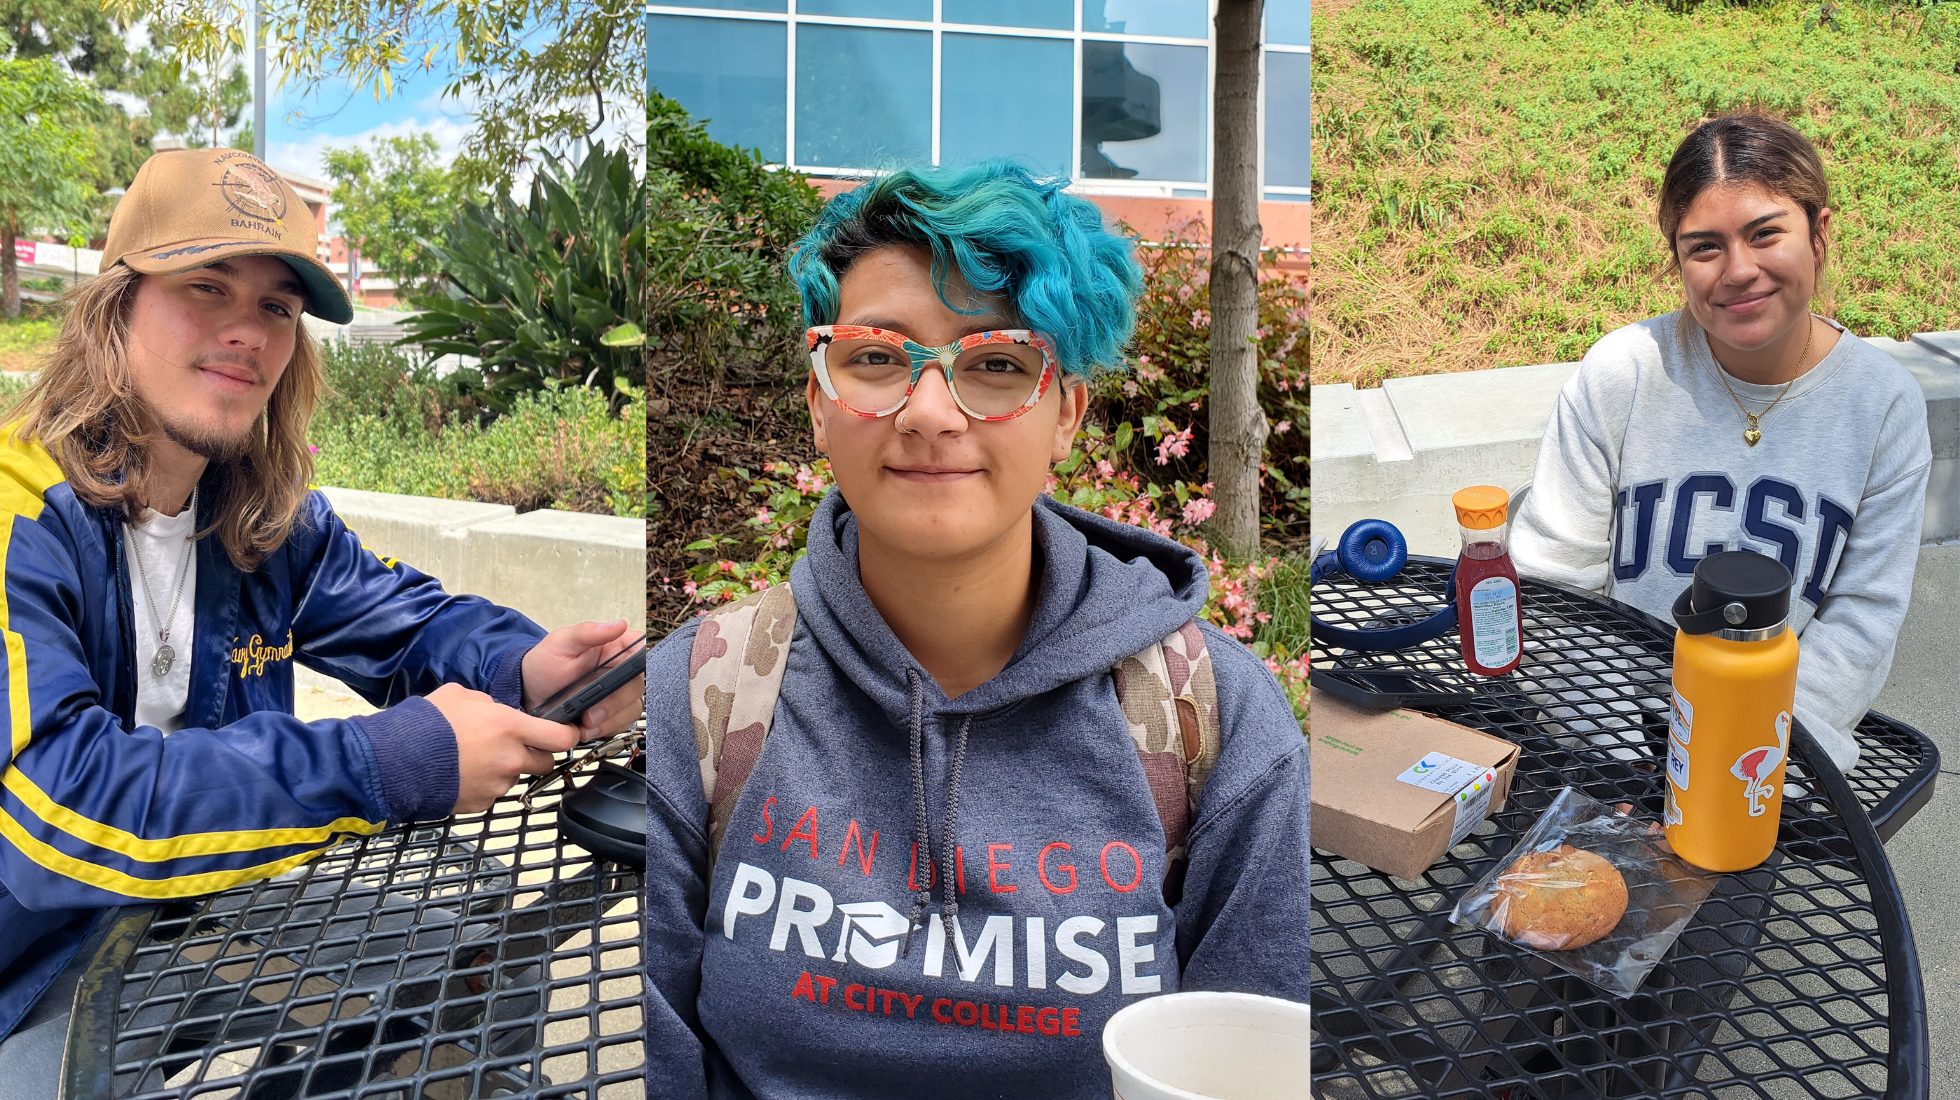 San Diego City College students Orion Bailey, left, Maya Guitierrez, middle, and Haily Cameros, right, were among those who shared their thoughts on the on-campus affordable housing project. City Times staff photos